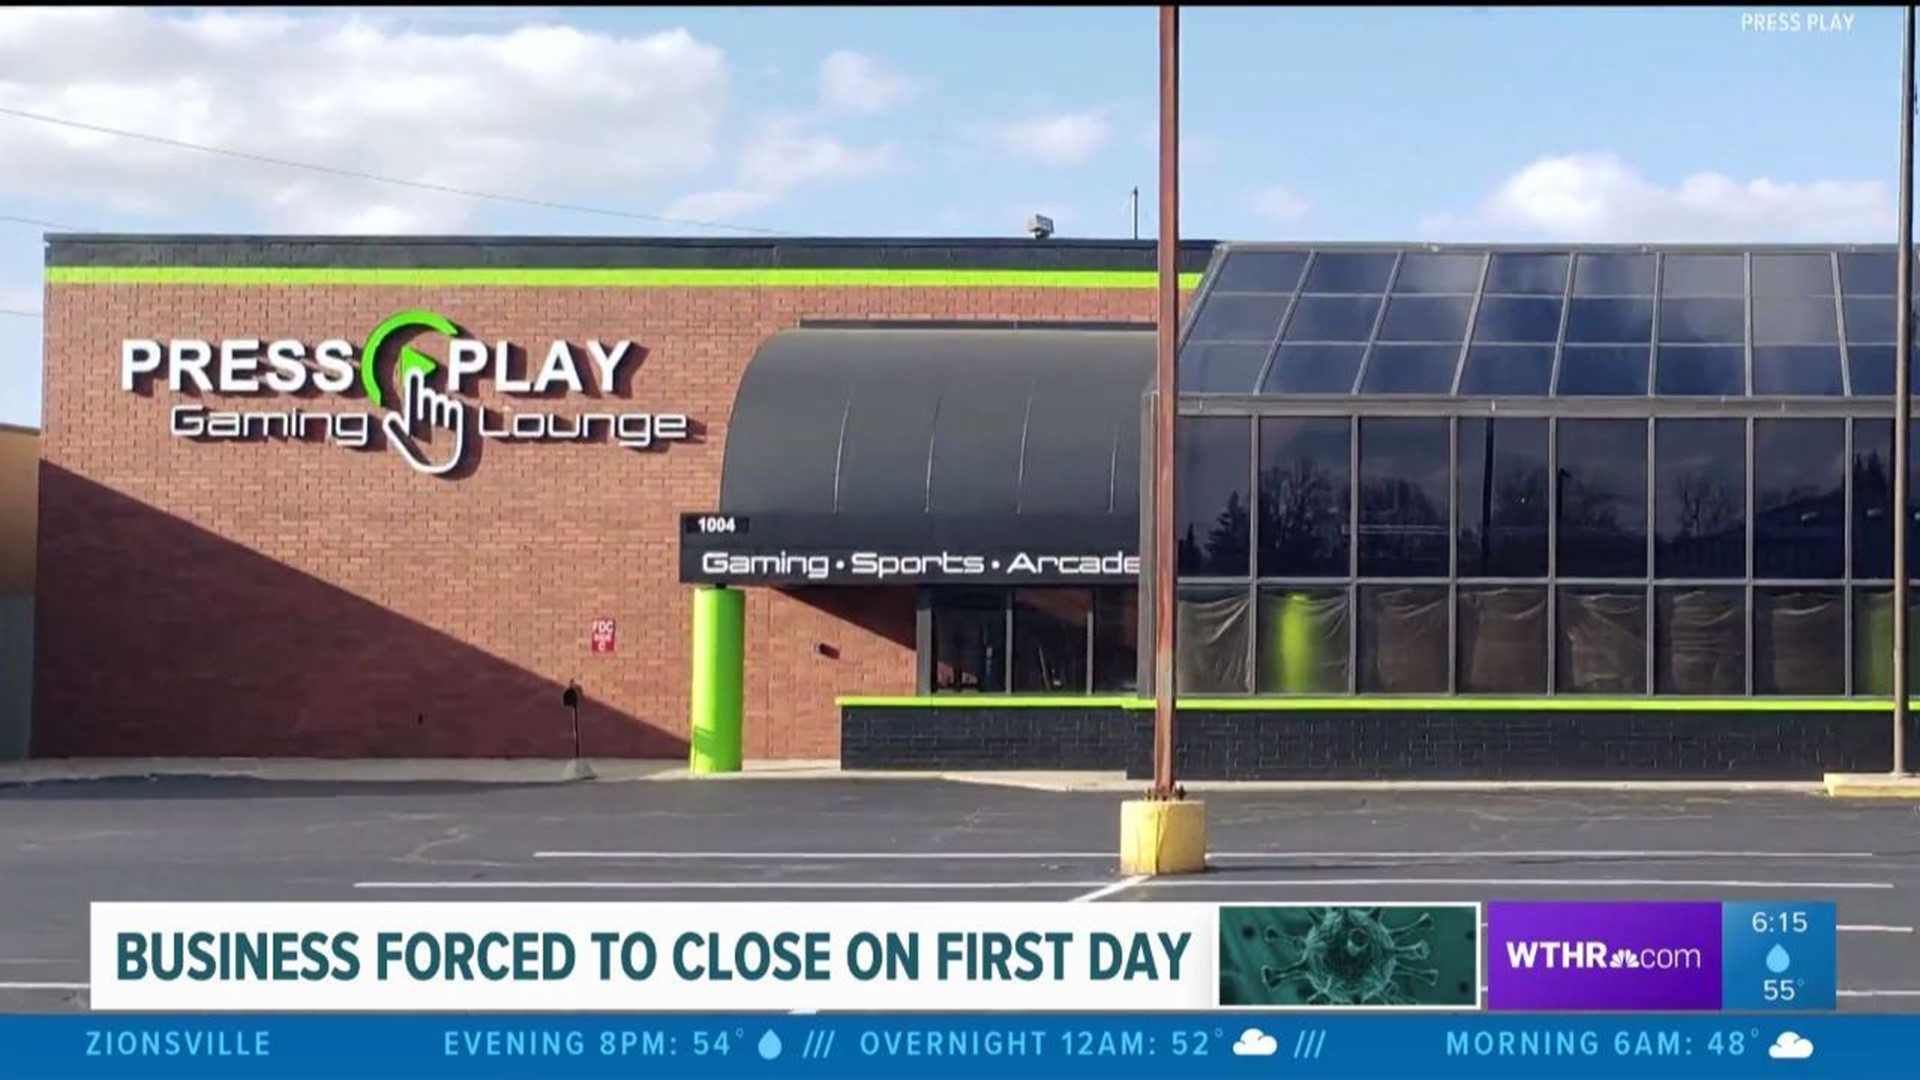 Business forced to close on opening day